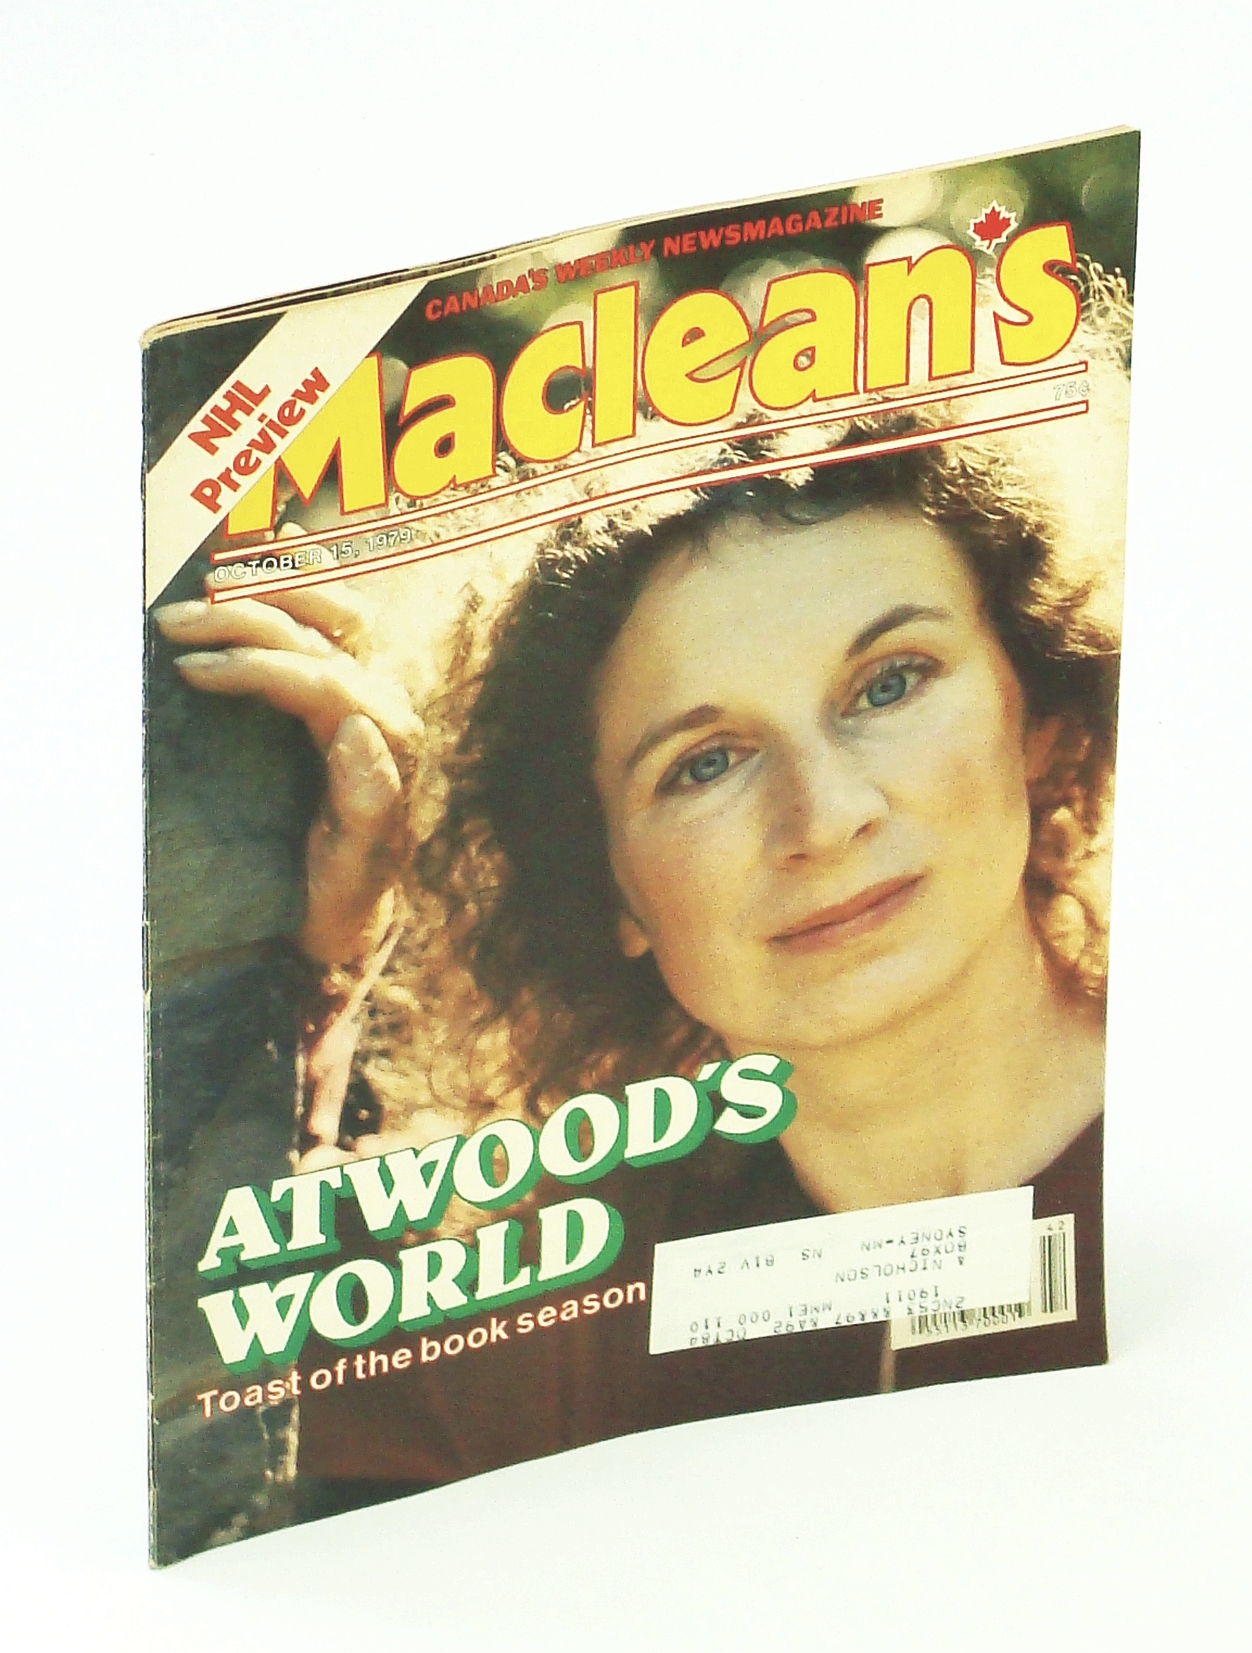 Image for Maclean's - Canada's Weekly News Magazine, October [Oct.] 15, 1979 - Margaret Atwood Cover Vol. 93, No. 42